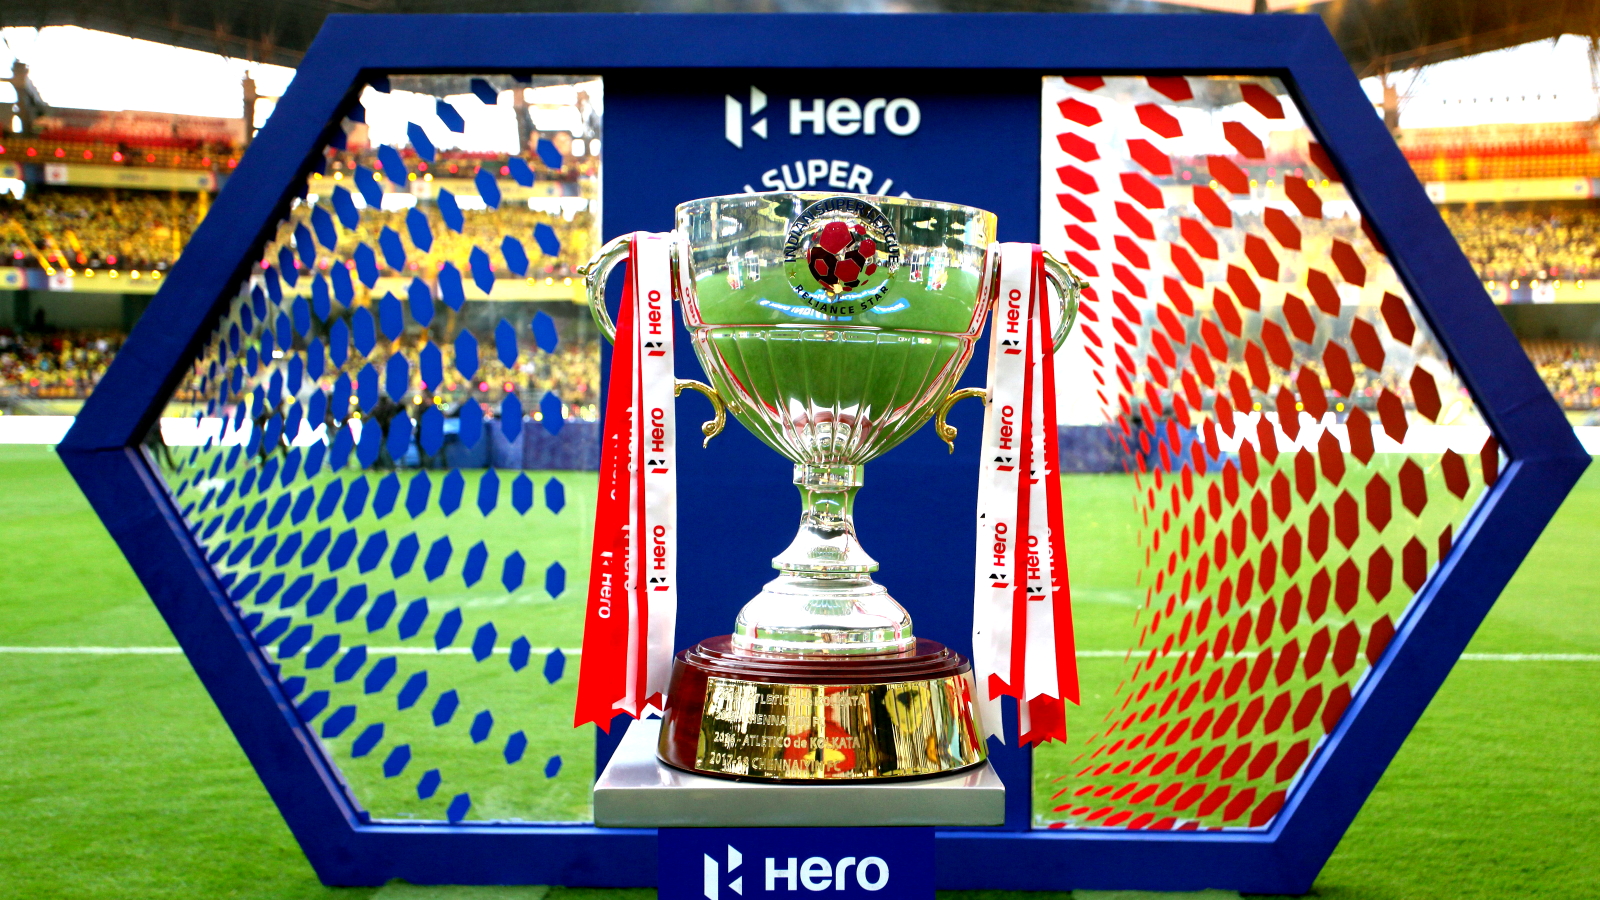 The Hero ISL cup during the opening ceremony and first match of the Indian Super League ( ISL ) between the Kerala Blasters FC and ATK held at the Jawaharlal Nehru Stadium, Kochi, India on the 20th October 2019. Photo by: Vipin Pawar / SPORTZPICS for ISL